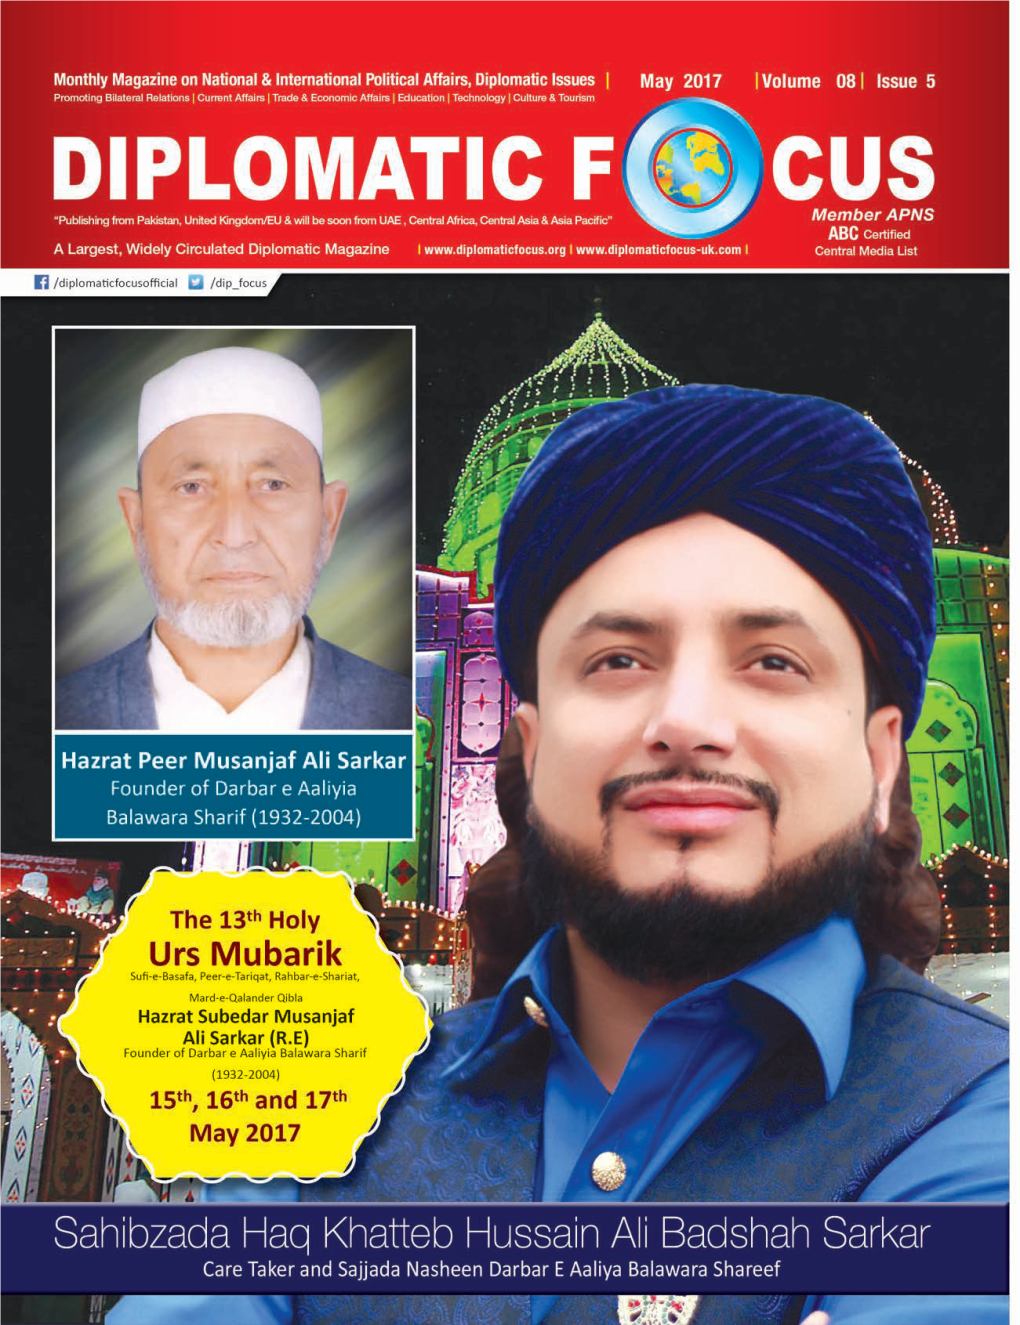 May 2017 Volume 08 Issue 5 “Publishing from Pakistan, United Kingdom/EU & Will Be Soon from UAE ”